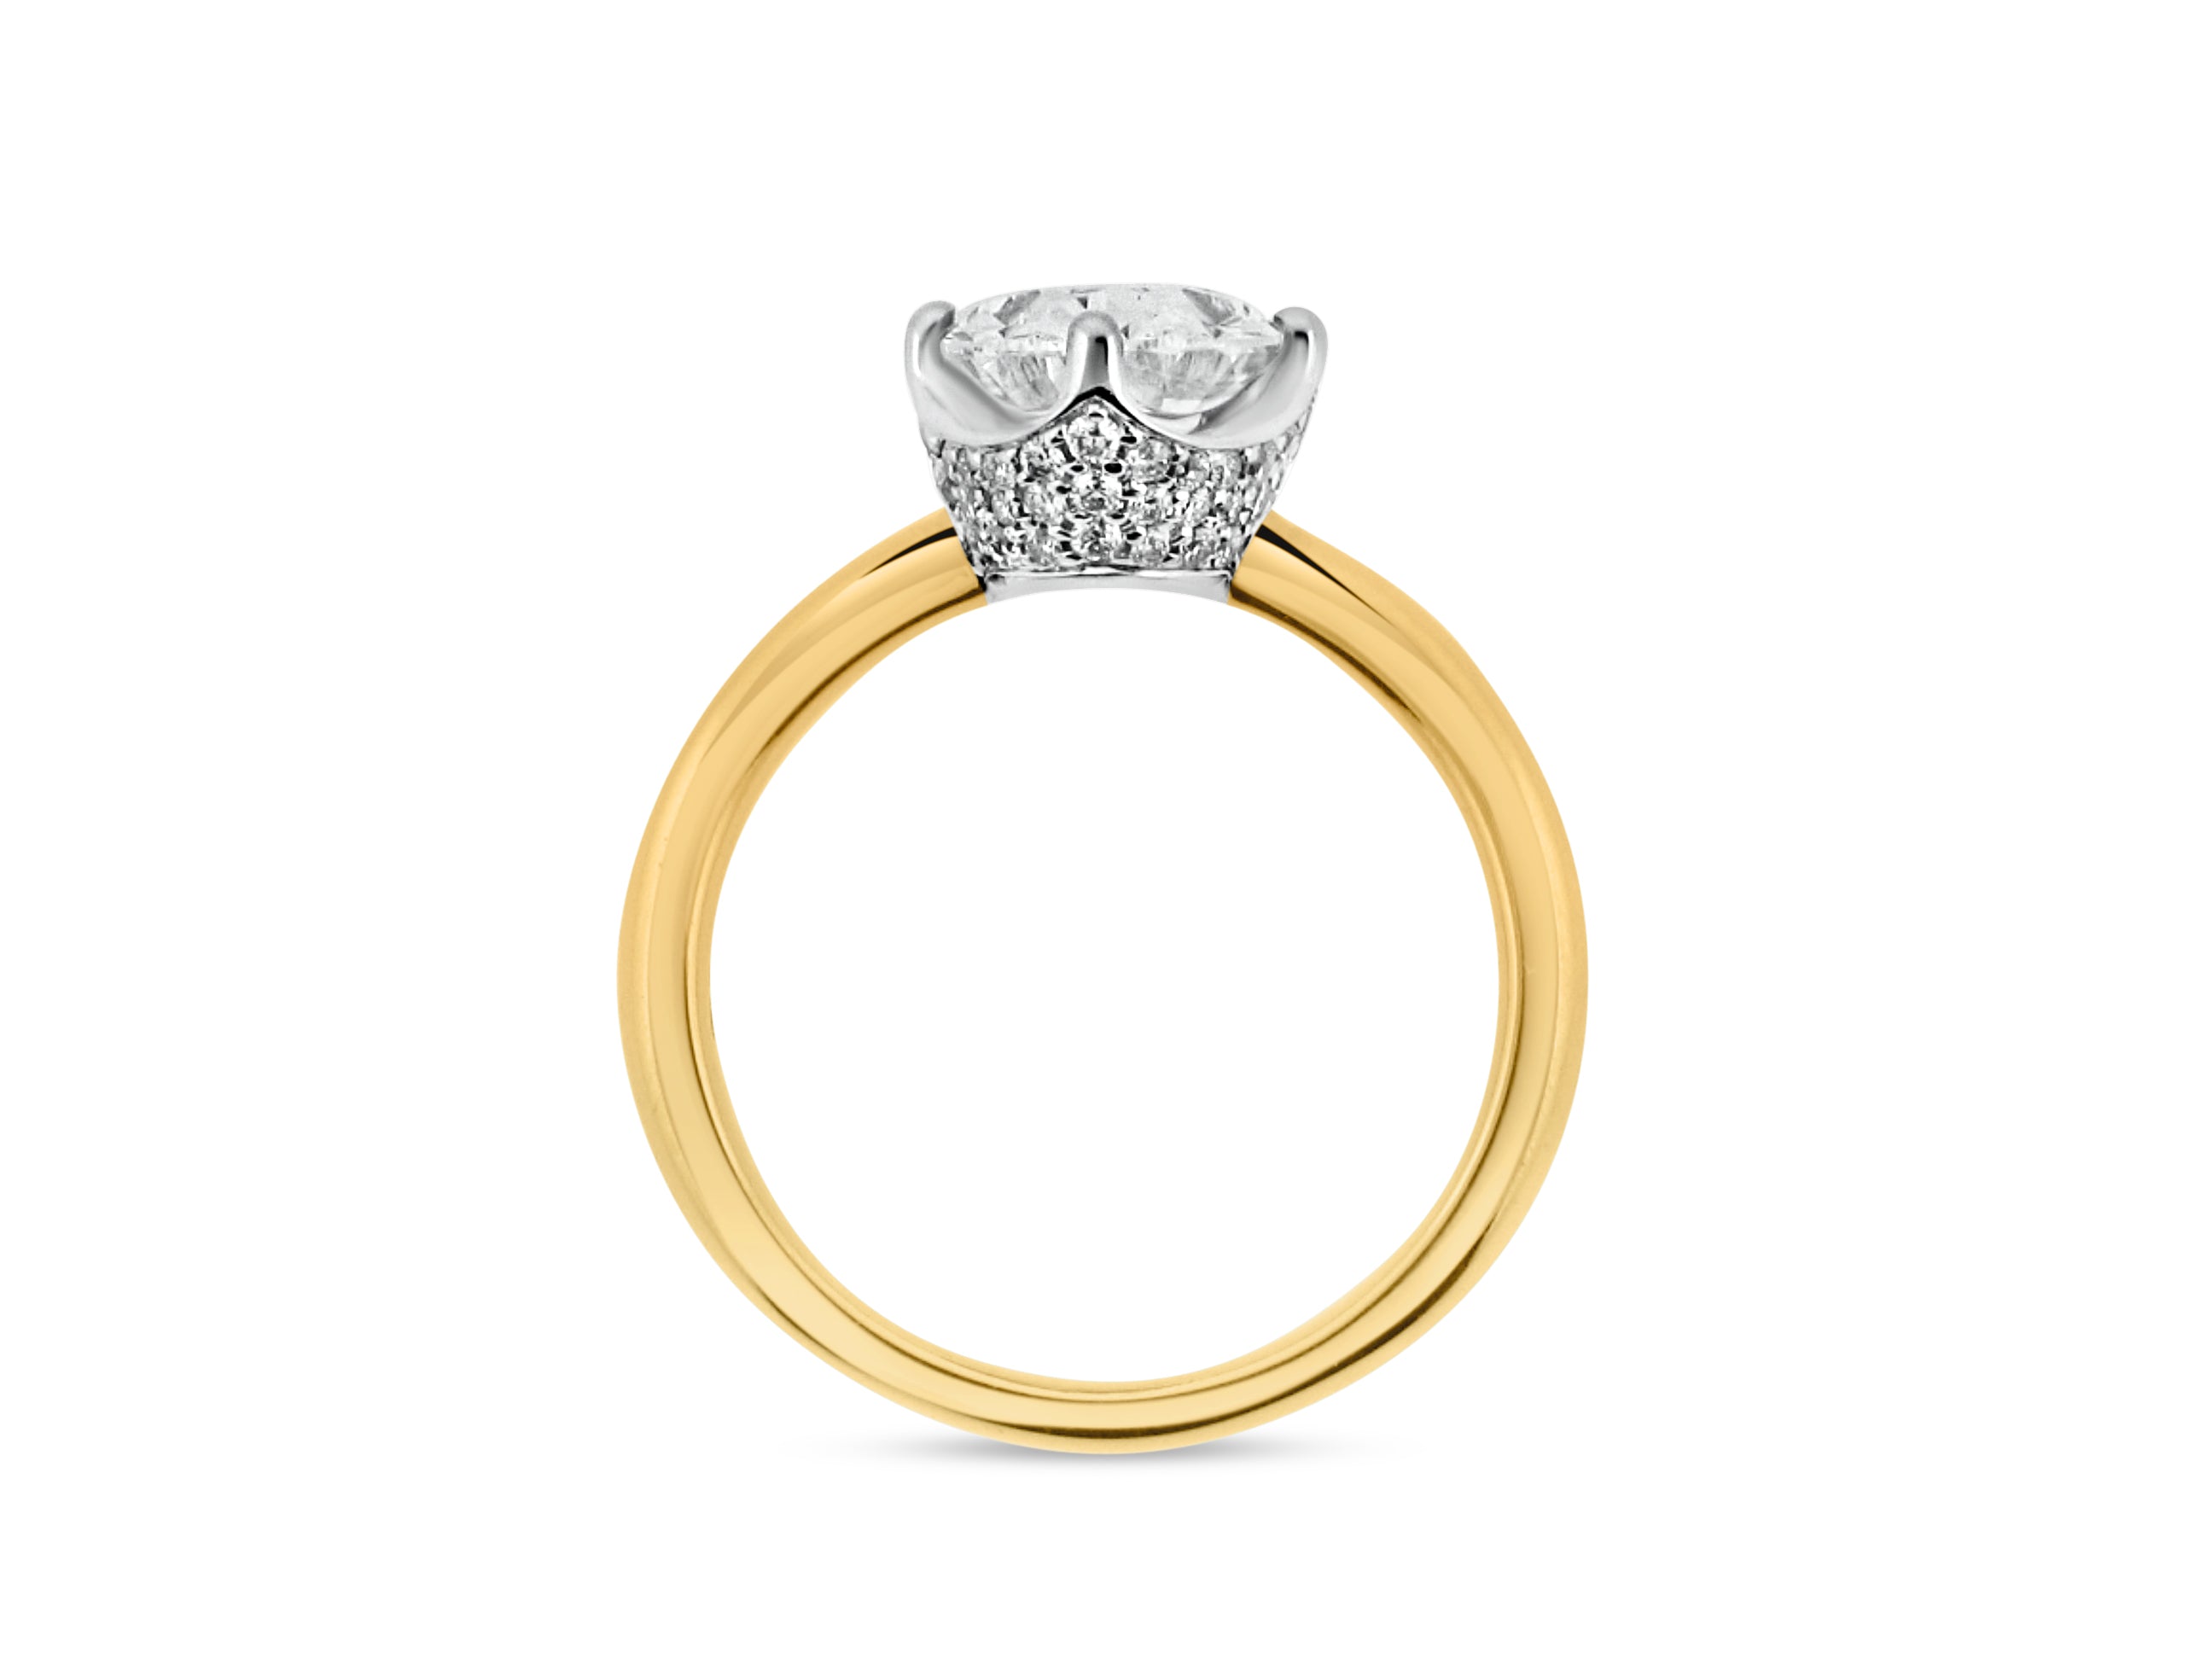 PRIVE' 18K YELLOW AND WHITE GOLD 2.47CT VS2 CLARITY AND F COLOR OVALSWAROVSKI SET WITH .25CT SI/G ACCENT NATURAL DIAMONDS - CERTIFIED